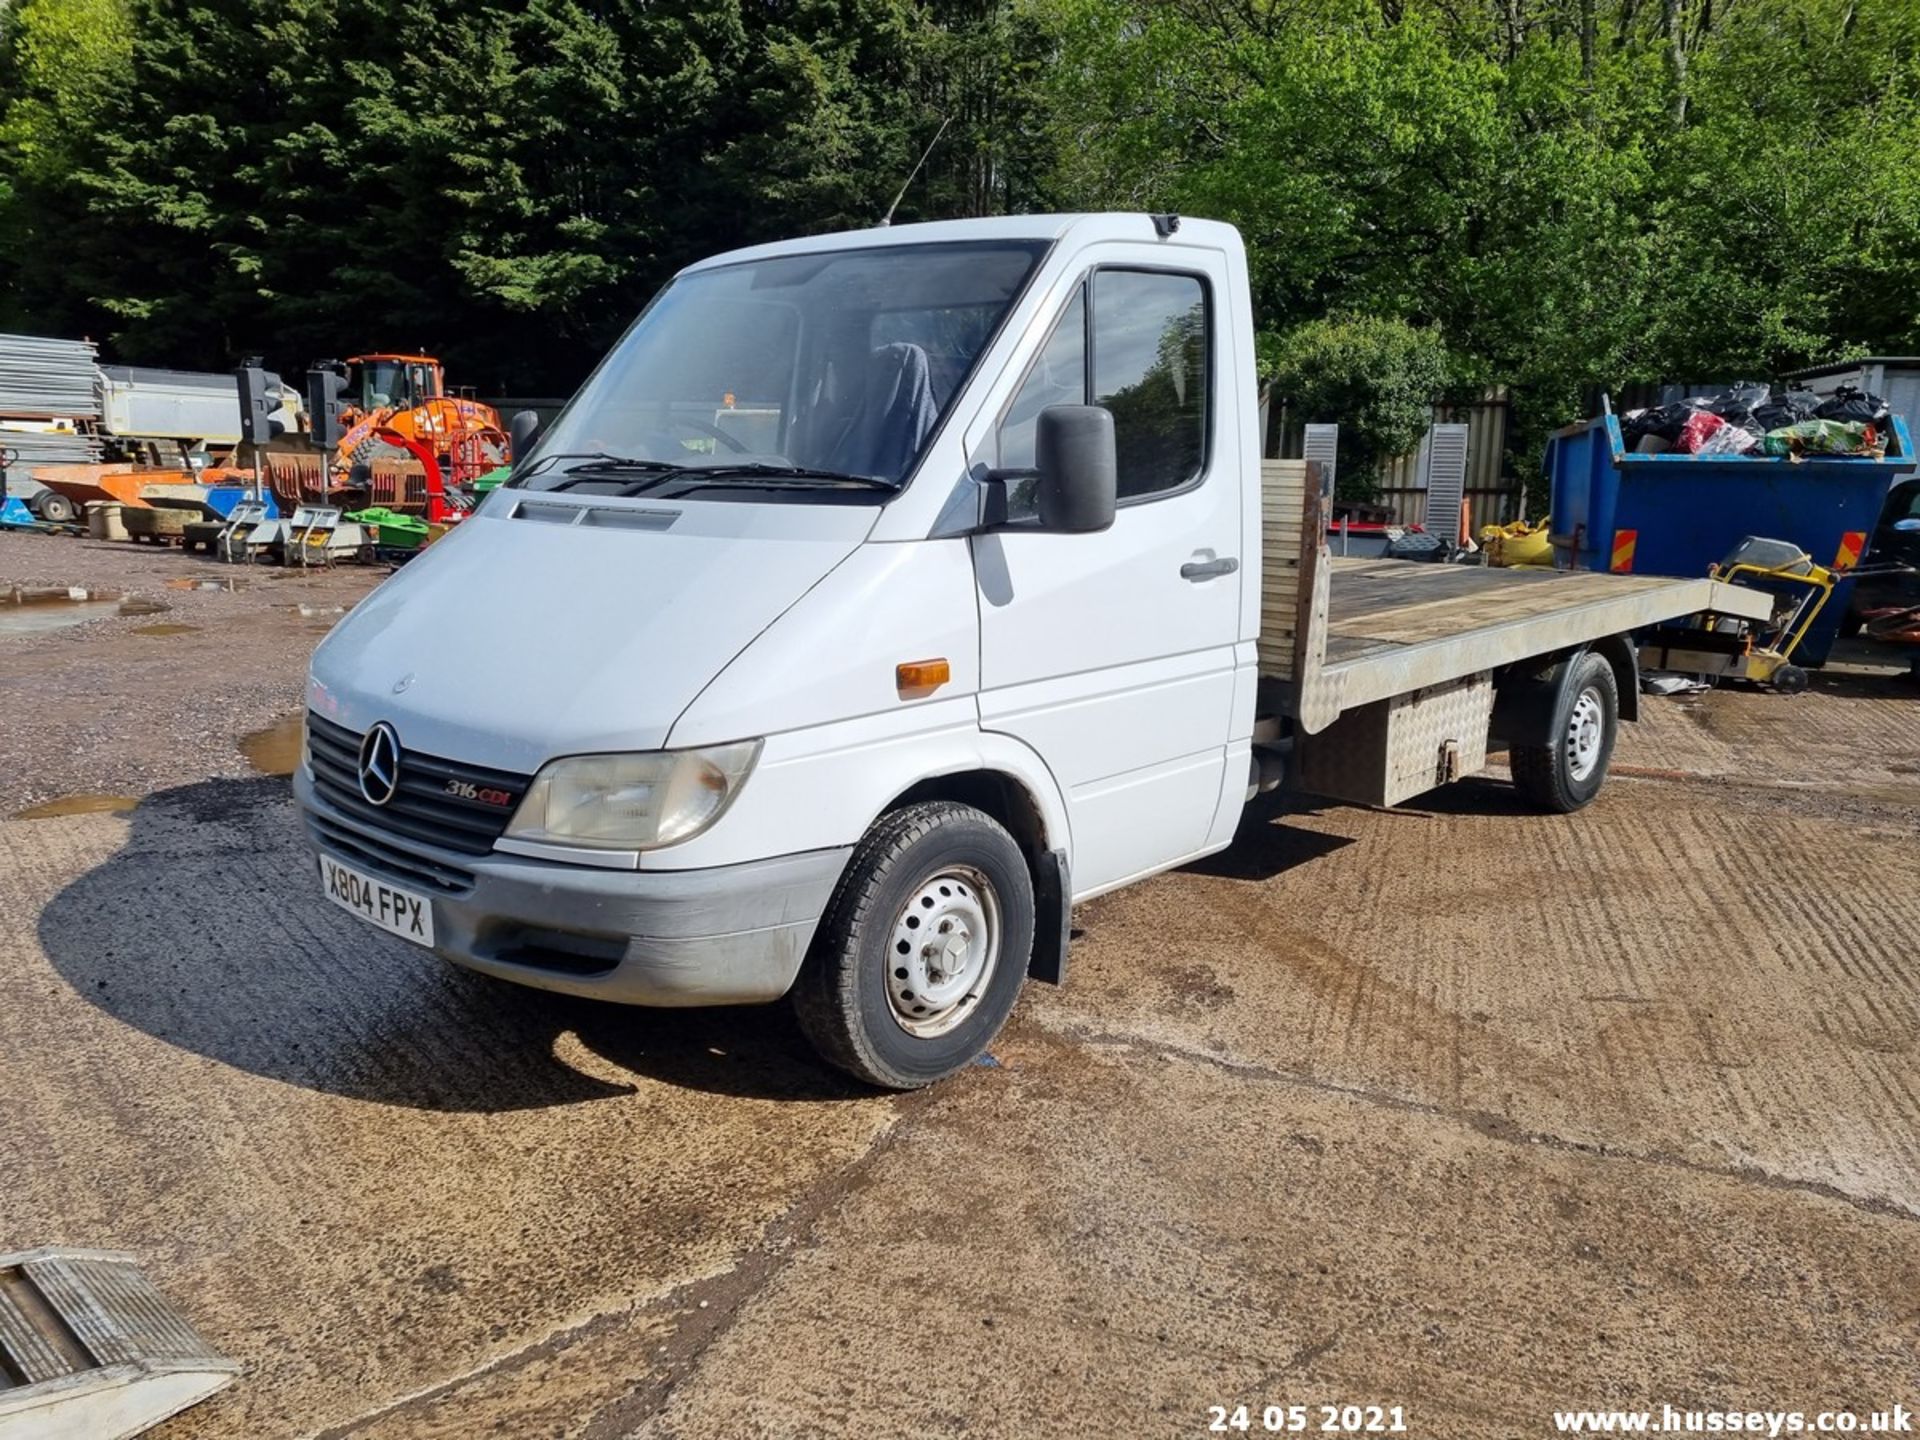 2000 MERCEDES 316 - 2698cc 2dr Flat Lorry (White, 167k) - Image 3 of 12